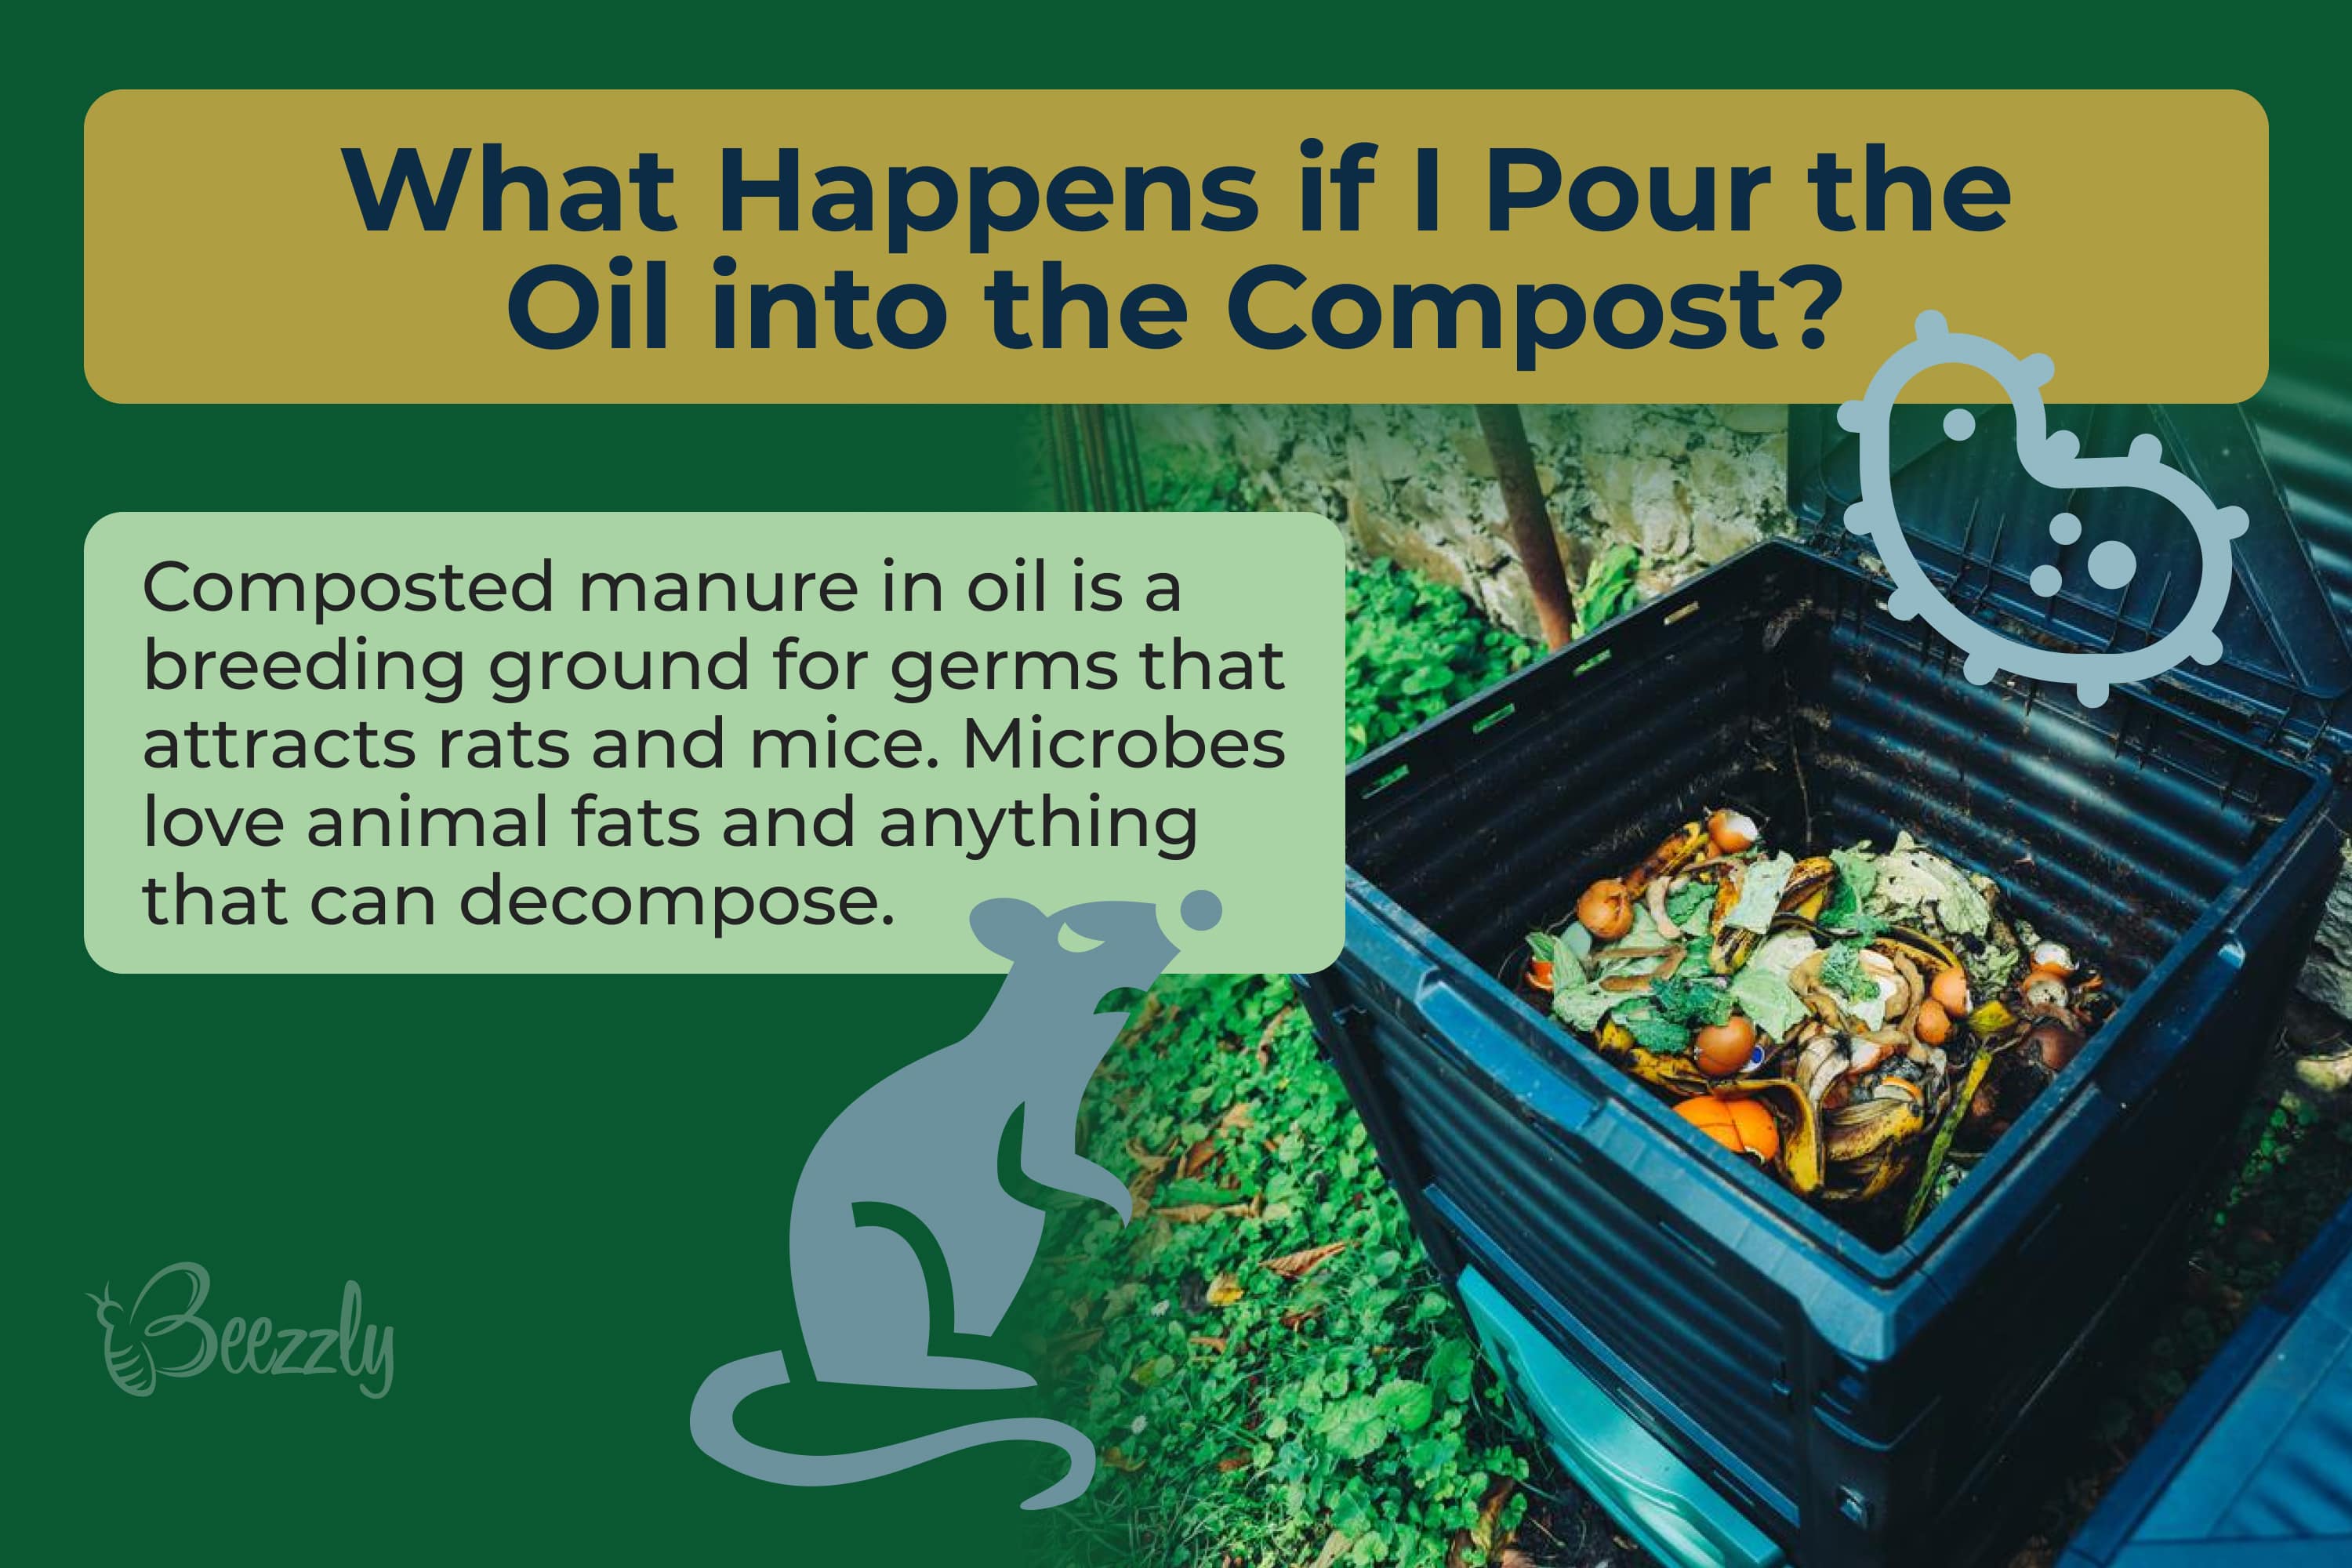 What happens if I pour the oil into the compost